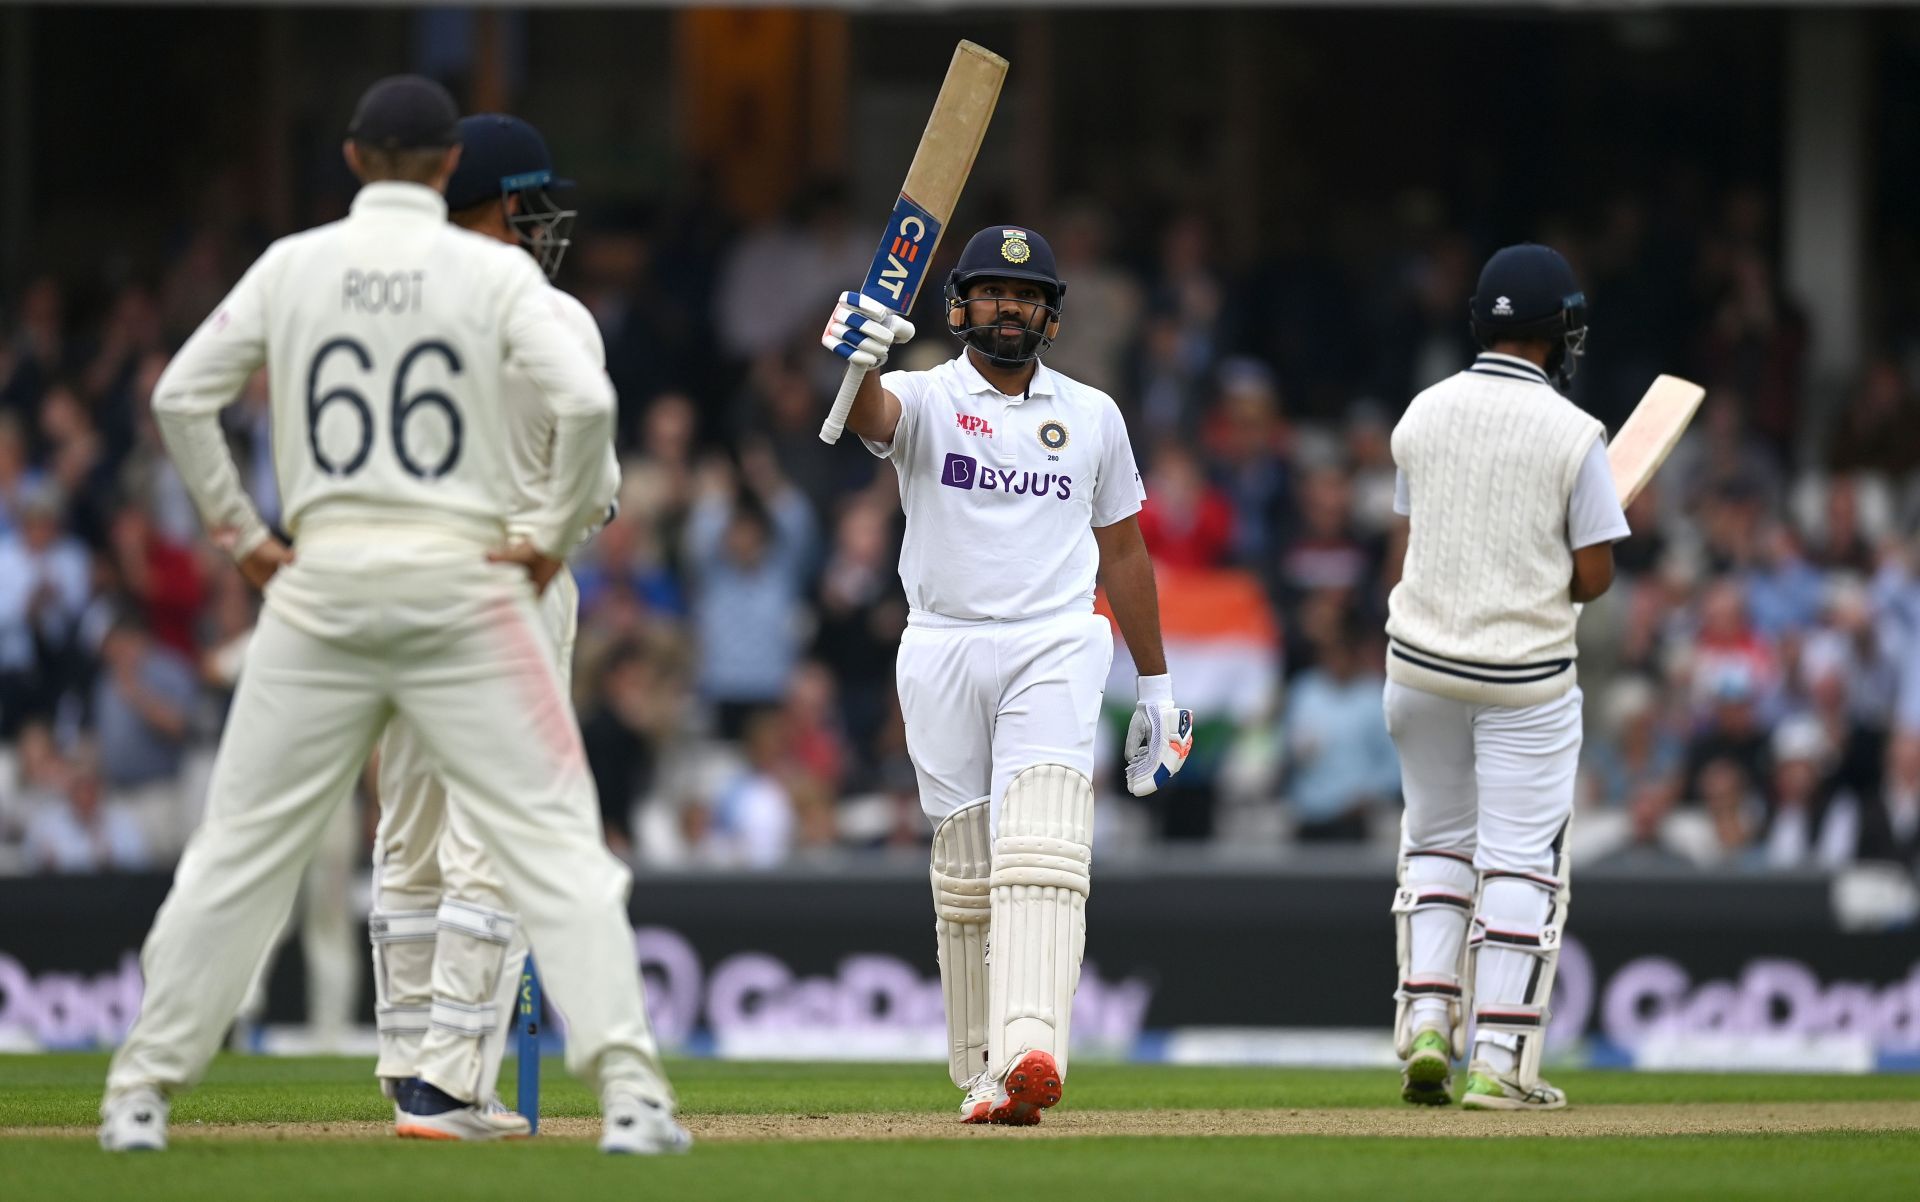 Rohit Sharma scored his maiden overseas Test hundred in England (Getty Images)